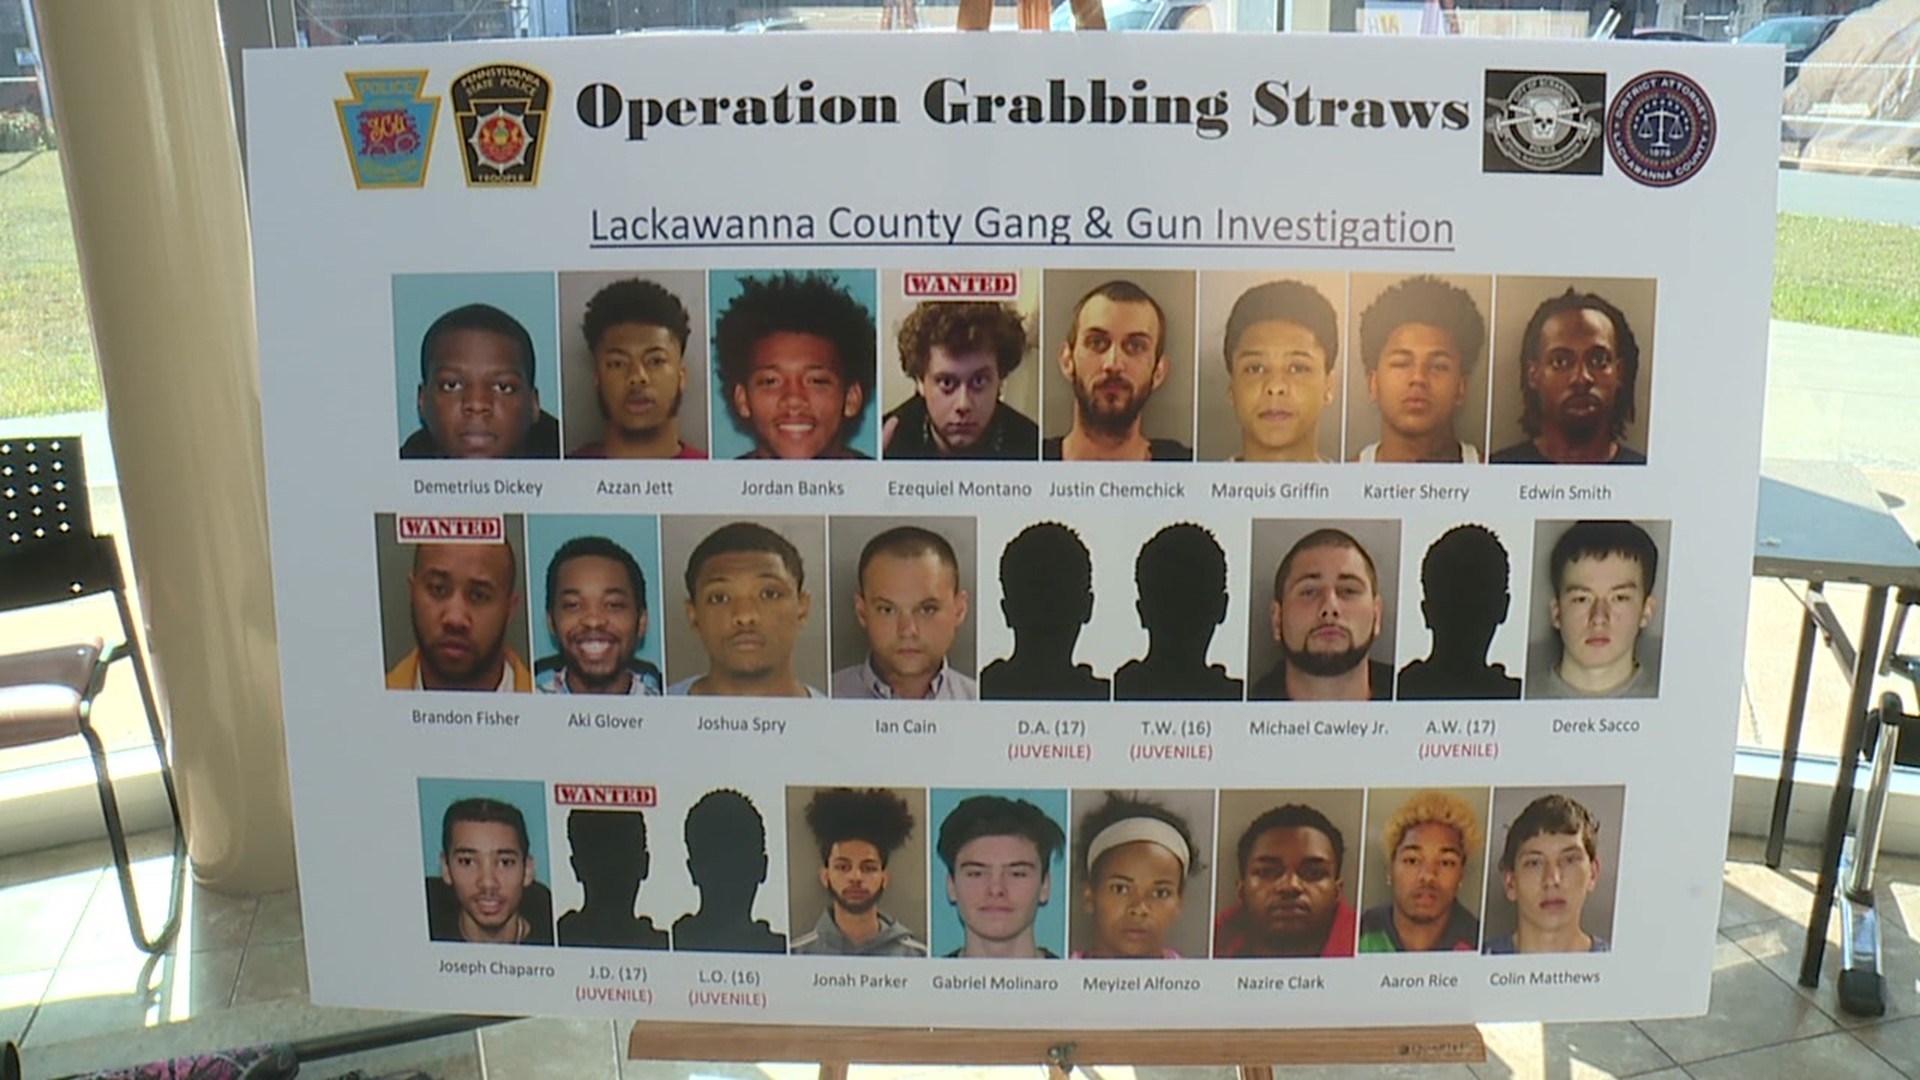 The police investigation was dubbed 'Operation Grabbing Straws.'